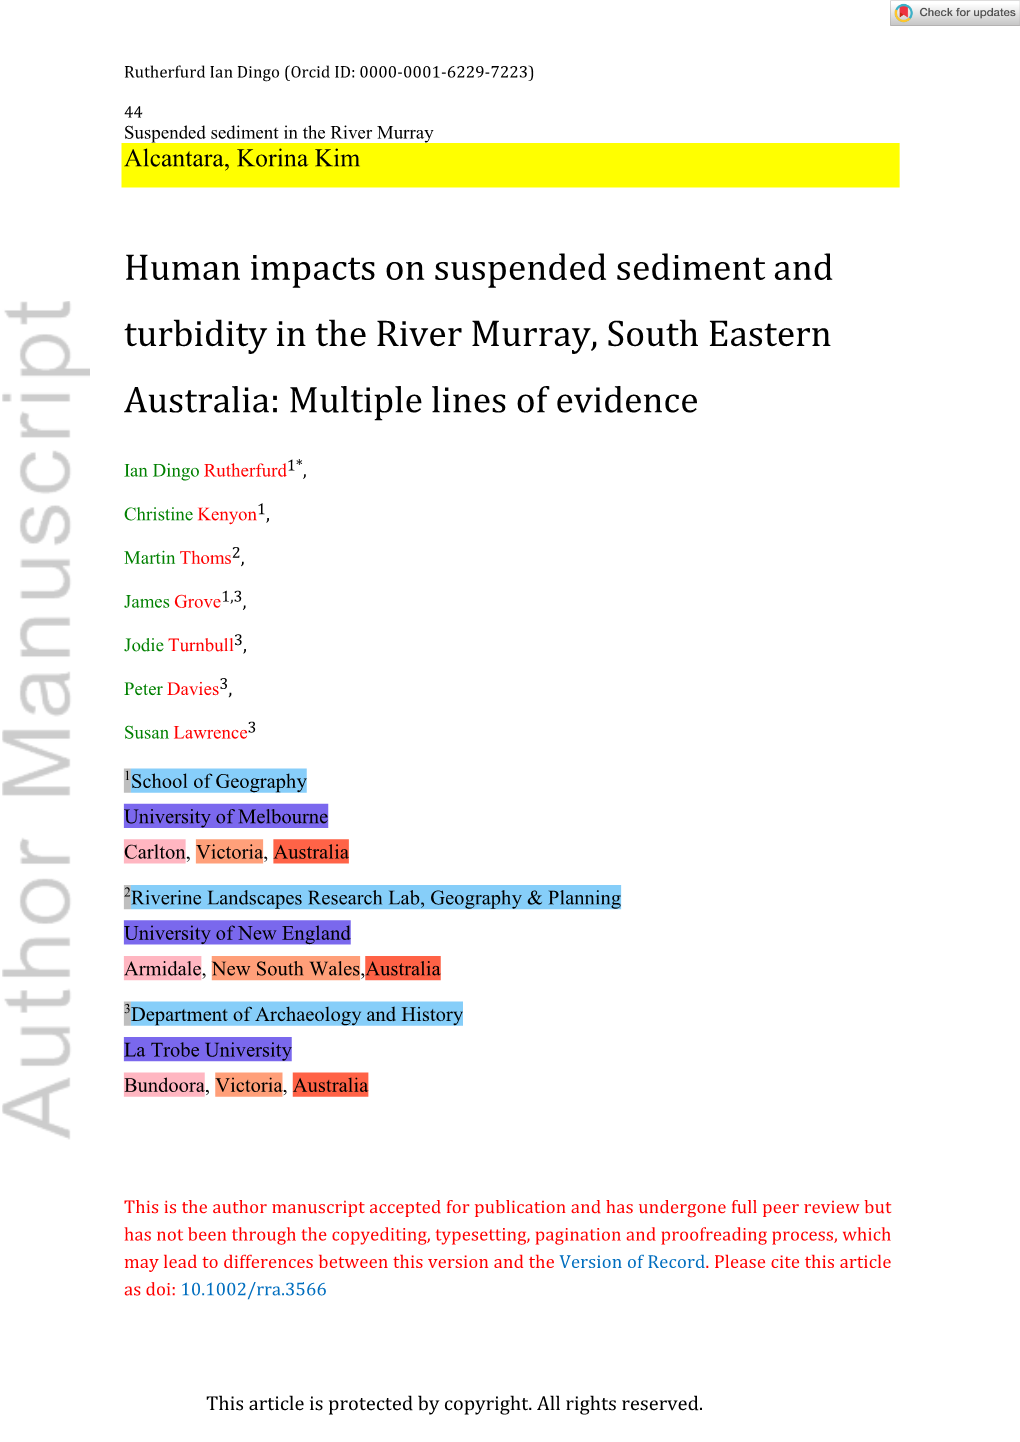 Human Impacts on Suspended Sediment and Turbidity in the River Murray, South Eastern Australia: Multiple Lines of Evidence